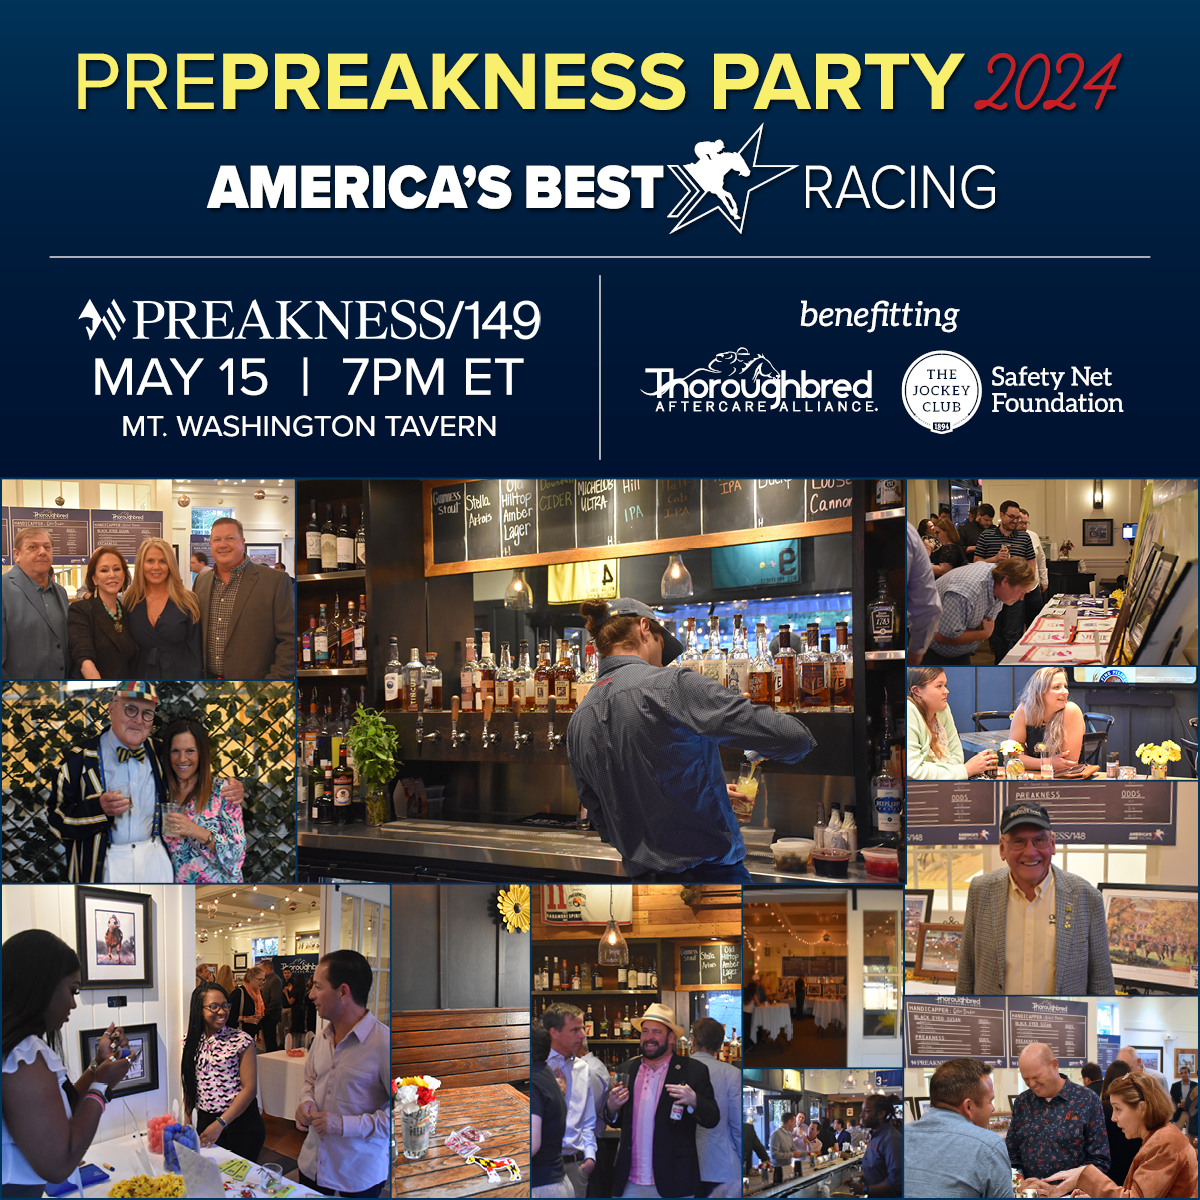 Tomorrow night is the night! 🥂 If you're in Baltimore, you've got to come to our Pre-Preakness Party at Mount Washington Tavern! All proceeds benefit @TBaftercare & @TJC_SafetyNet. The party kicks off at 7 PM ET. 🎟️ $35: loom.ly/FVoP5U0